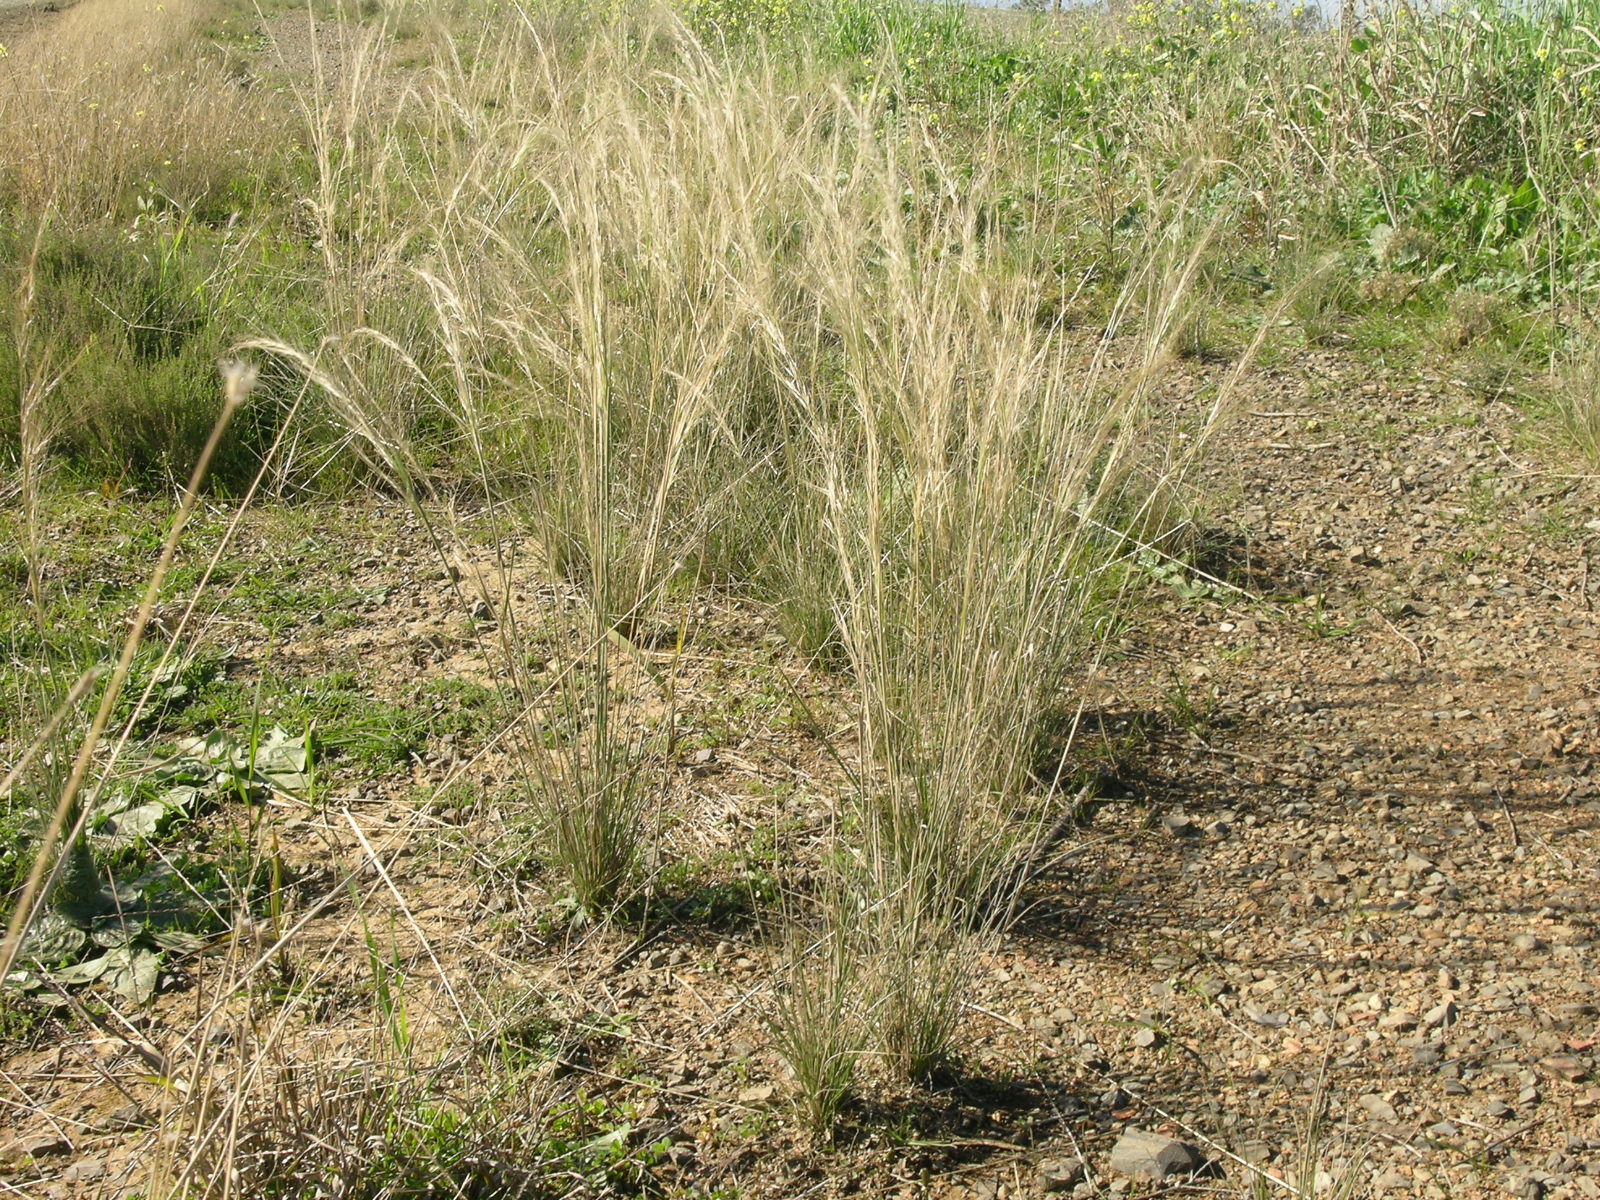 Photograph of small clumps of speargrass growing in gravely soil. The speargrass is green with yellow, feather-like inflorescences.